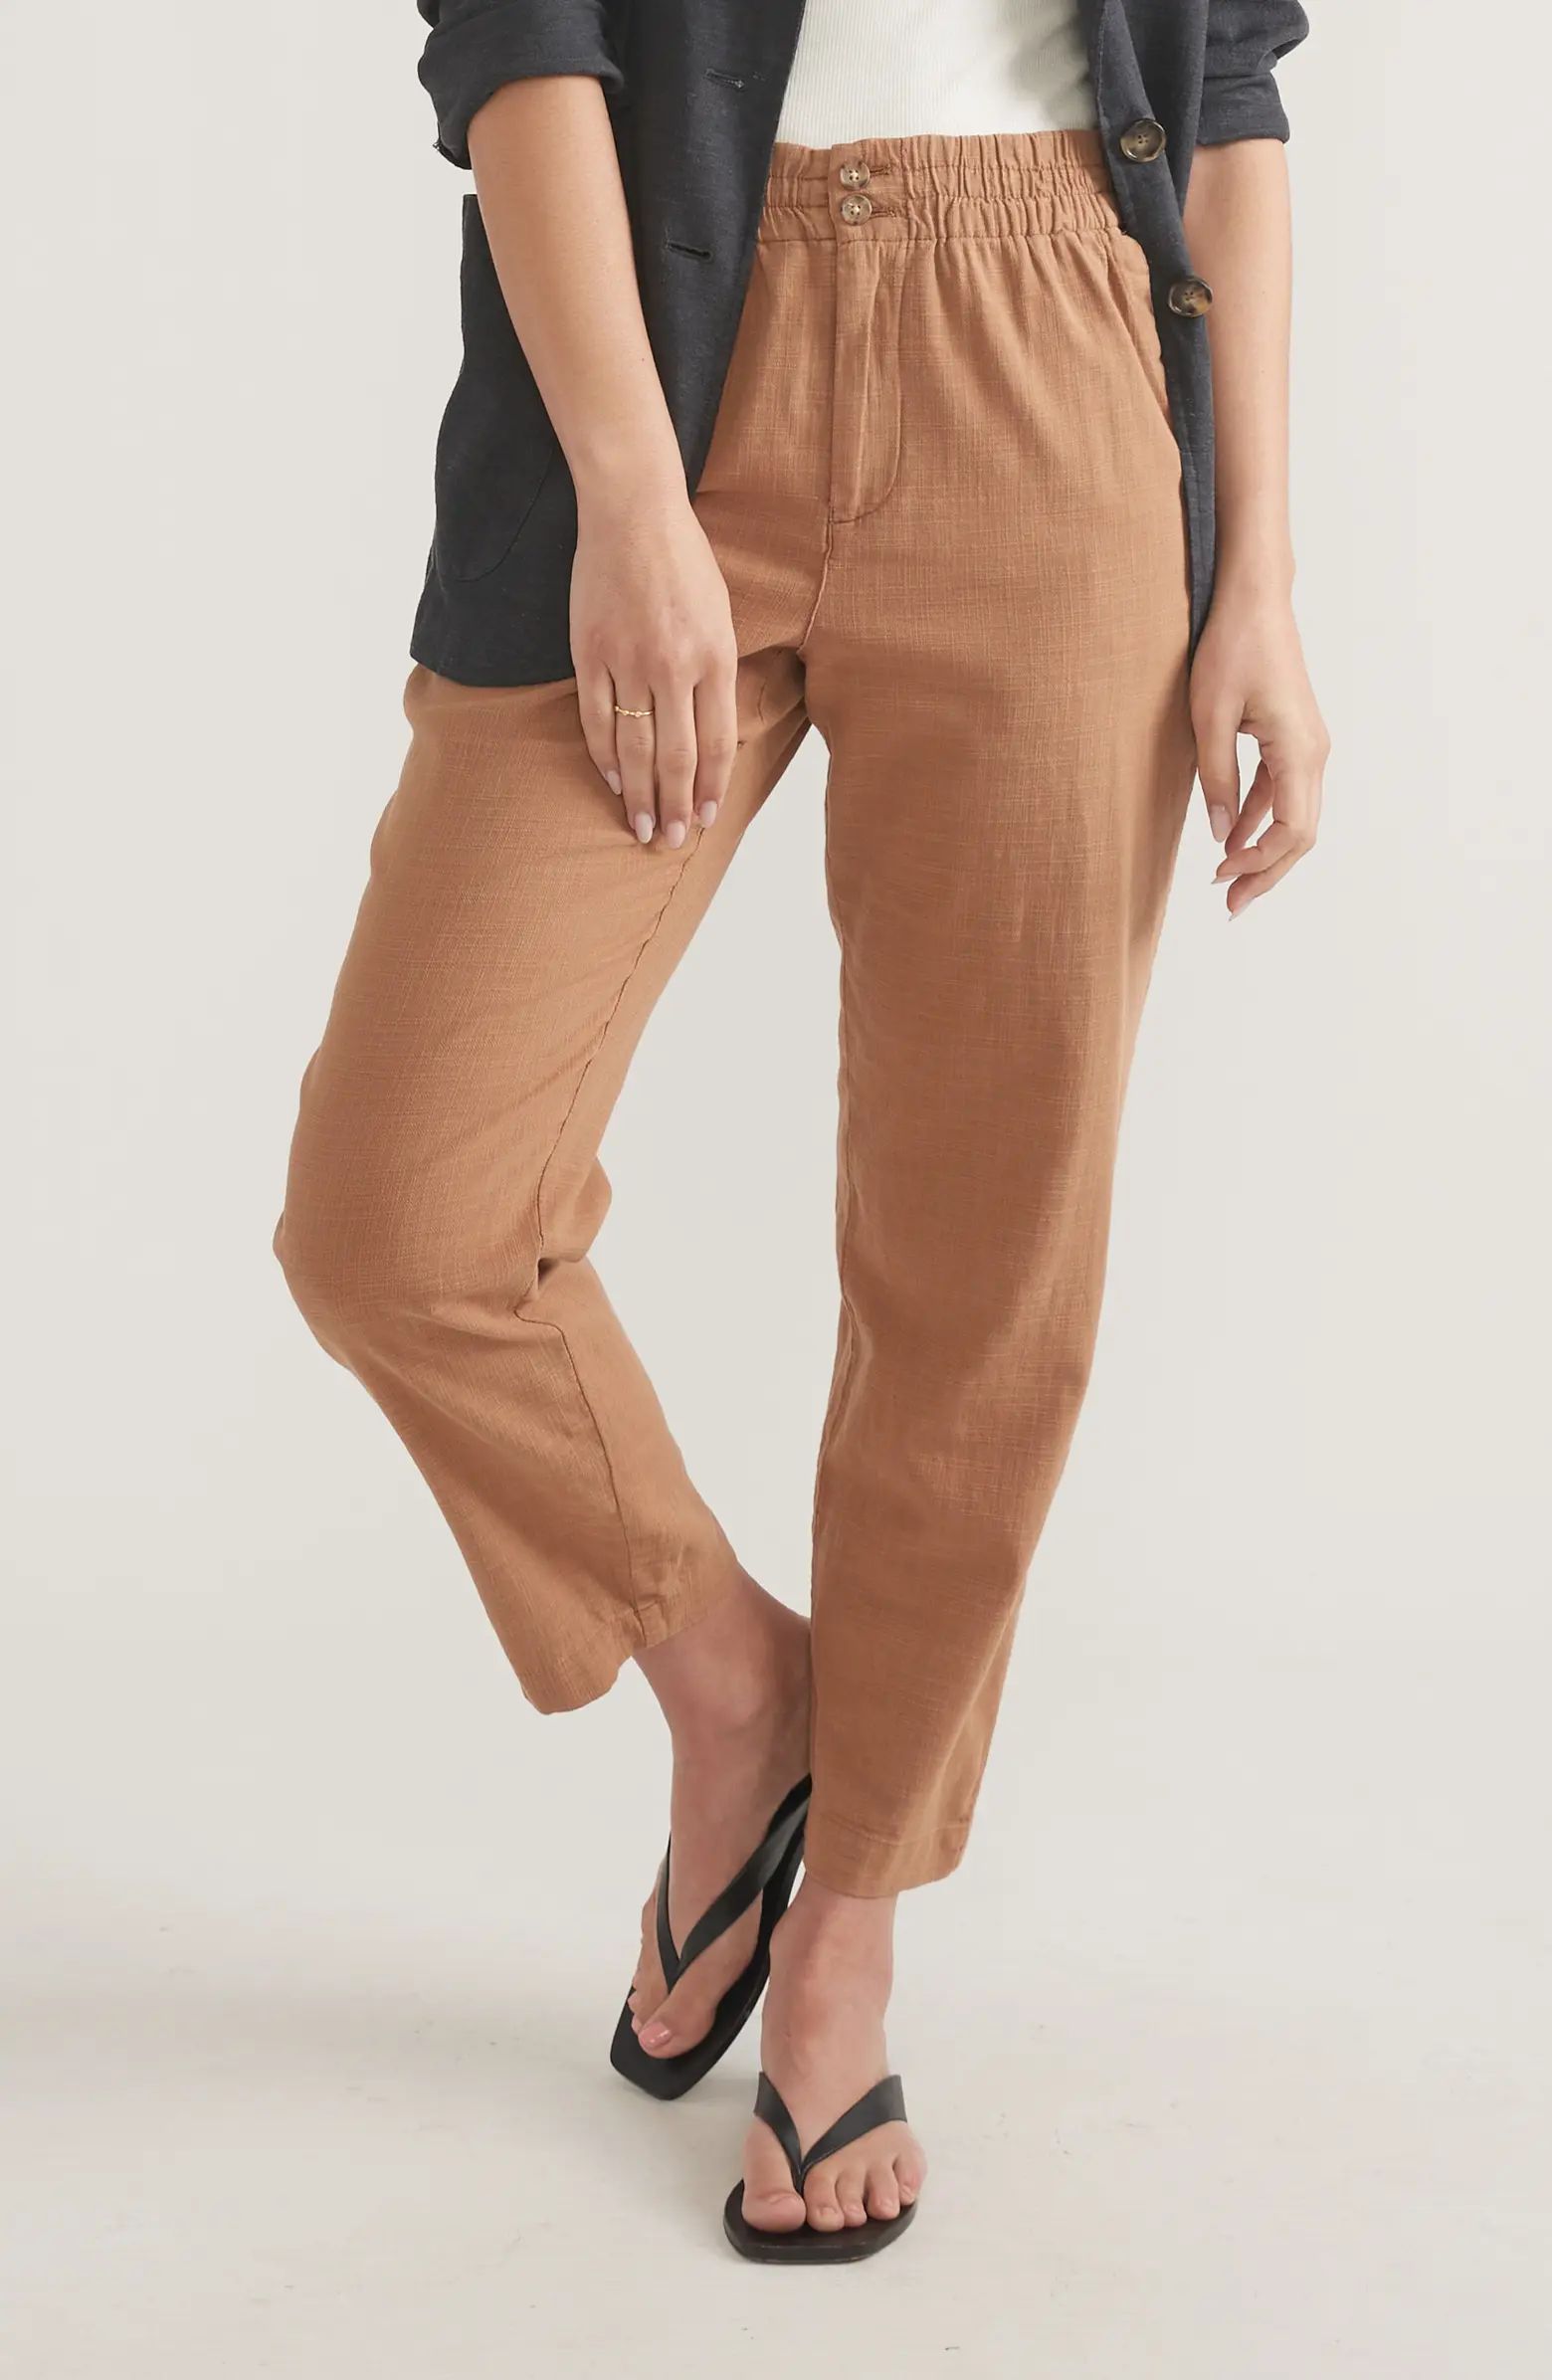 Marine Layer Elle Relaxed Crop Pants | Nordstrom | Nordstrom